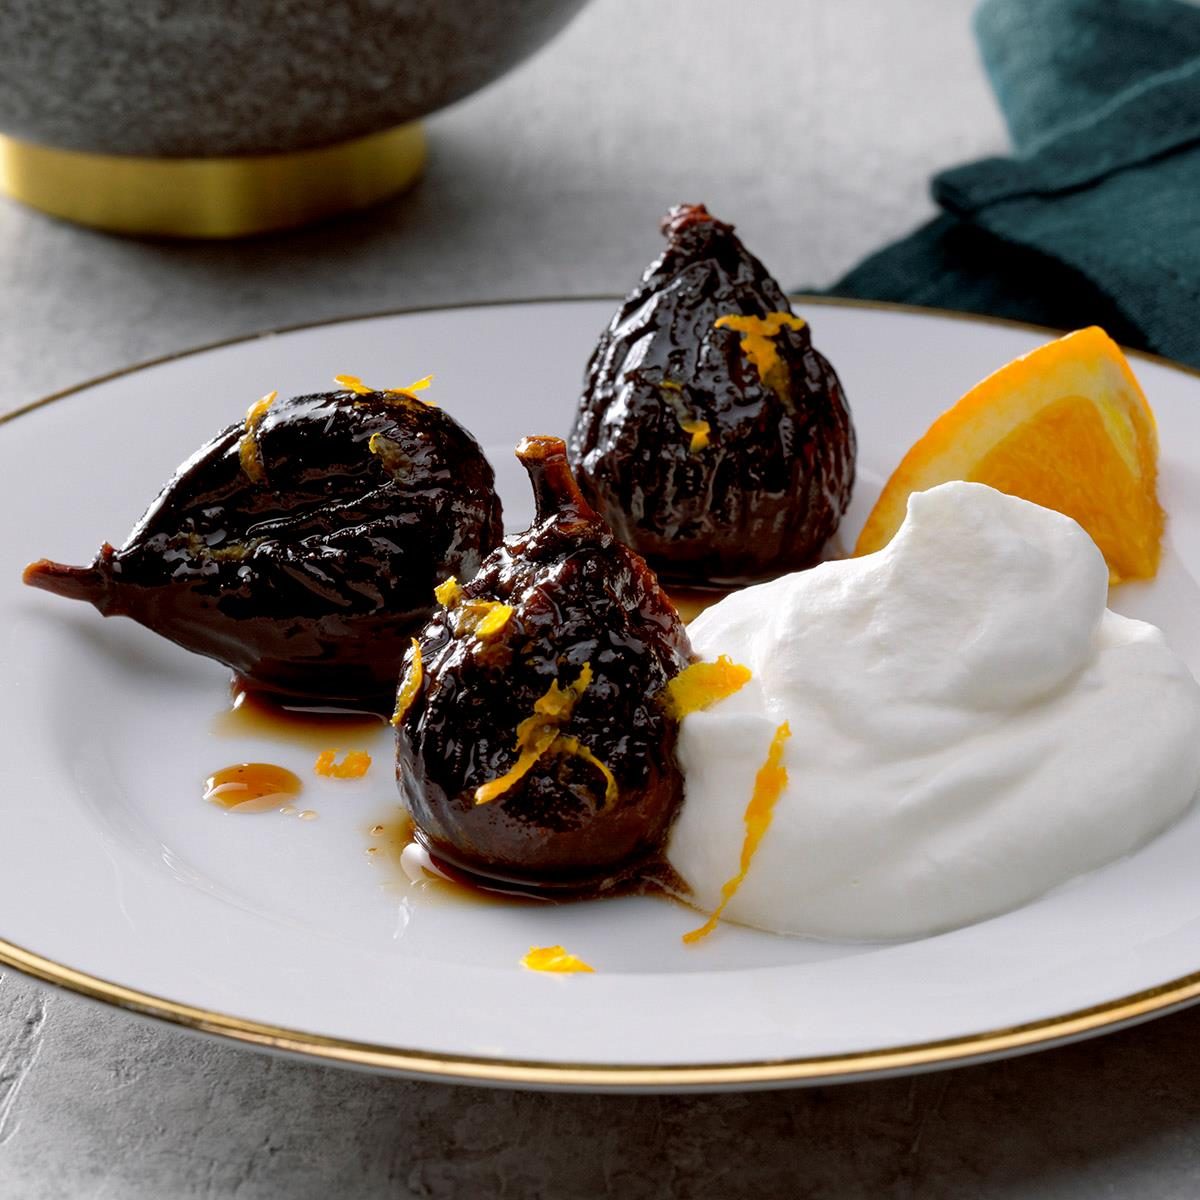 Baked Figs Exps Tohca23 90917 Dr 08 04 4b